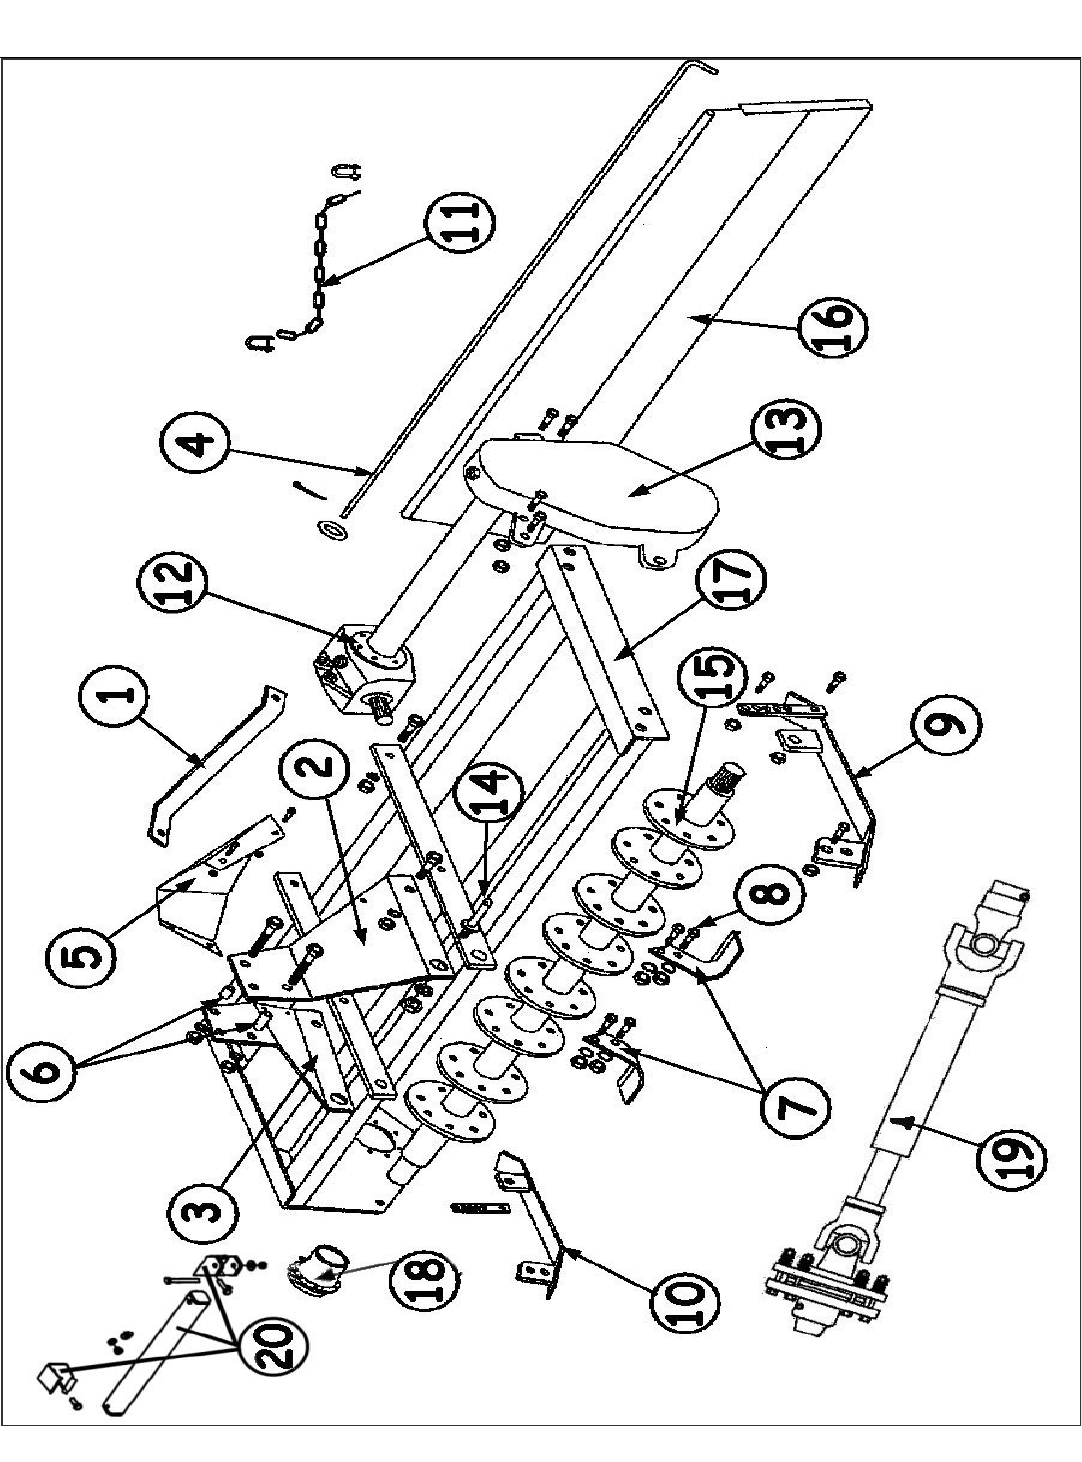 King Kutter Tiller Parts Diagram Diagram Resource Gallery Images and